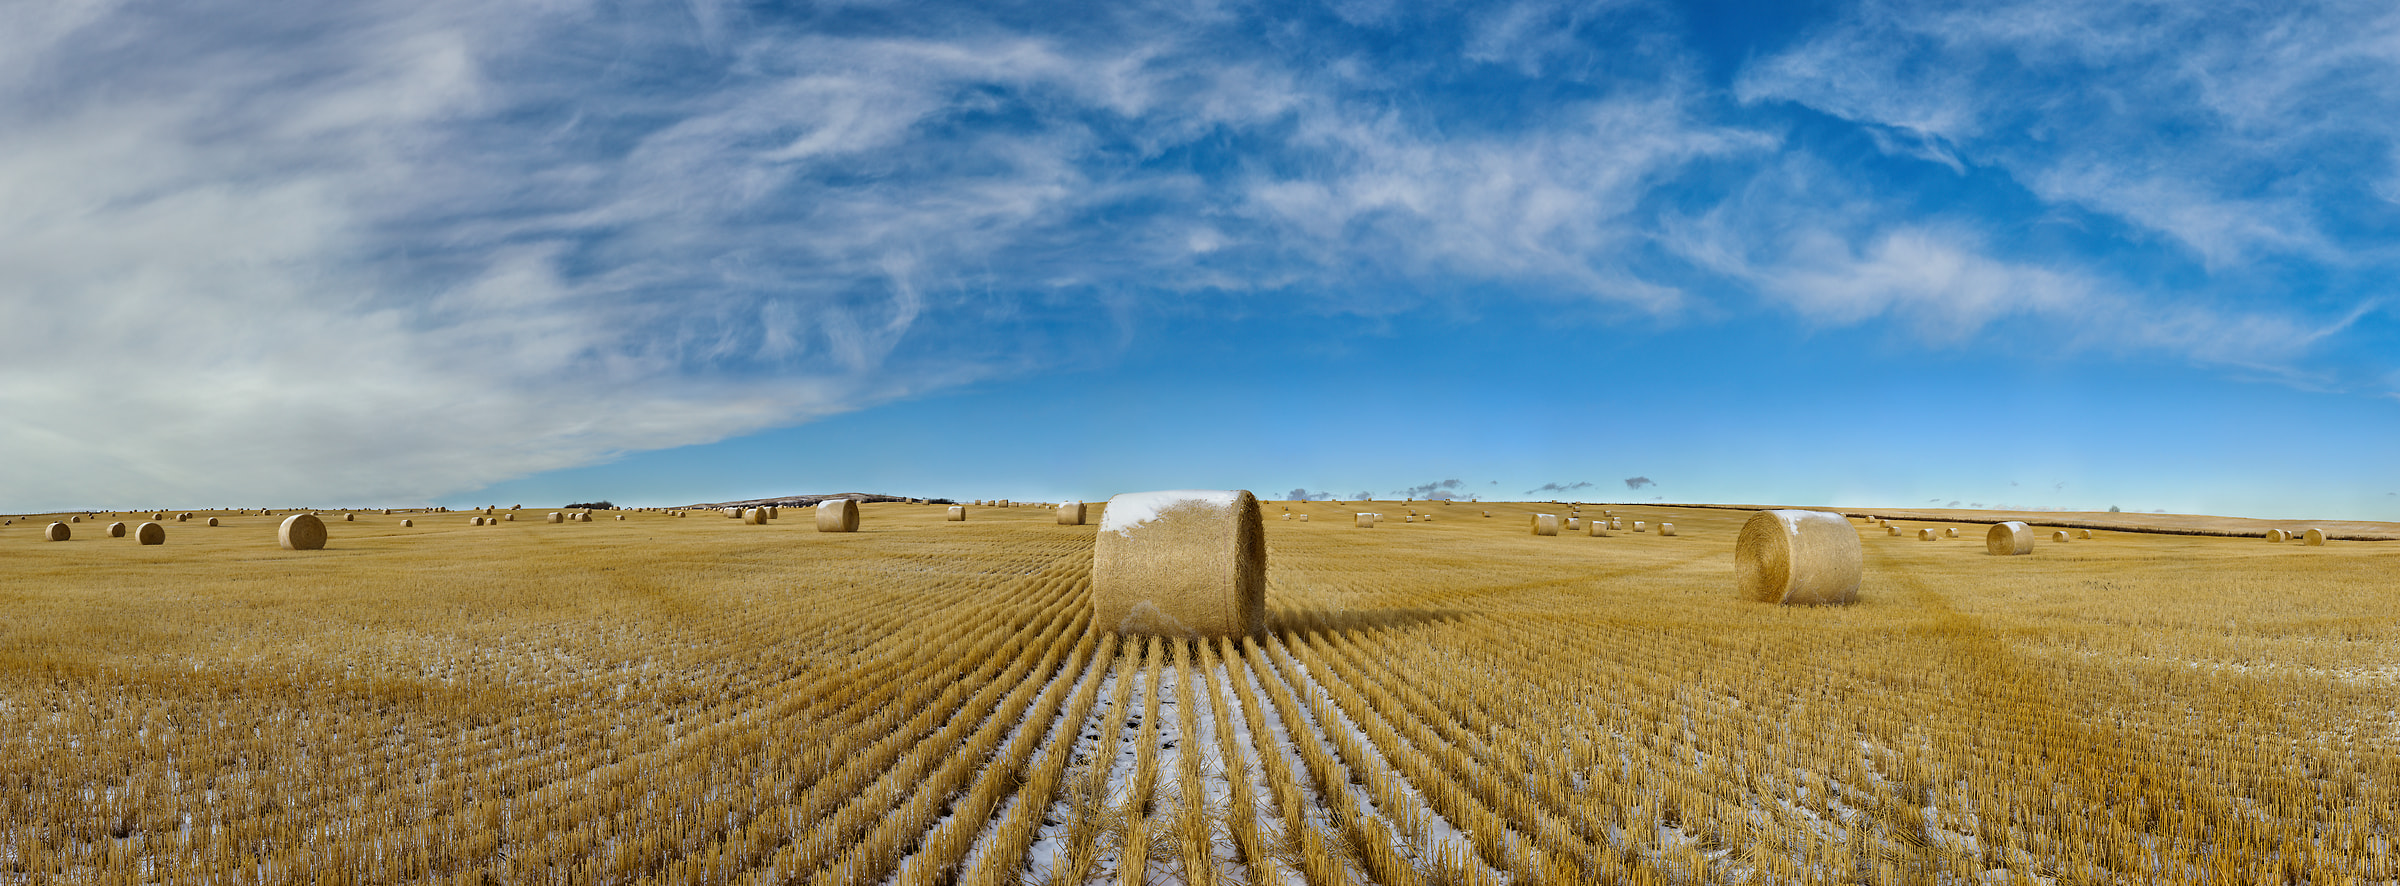 2,729 megapixels! A very high resolution, large-format VAST panorama photo of hay fields; landscape photograph created by Scott Dimond in Vulcan County, Alberta, Canada.